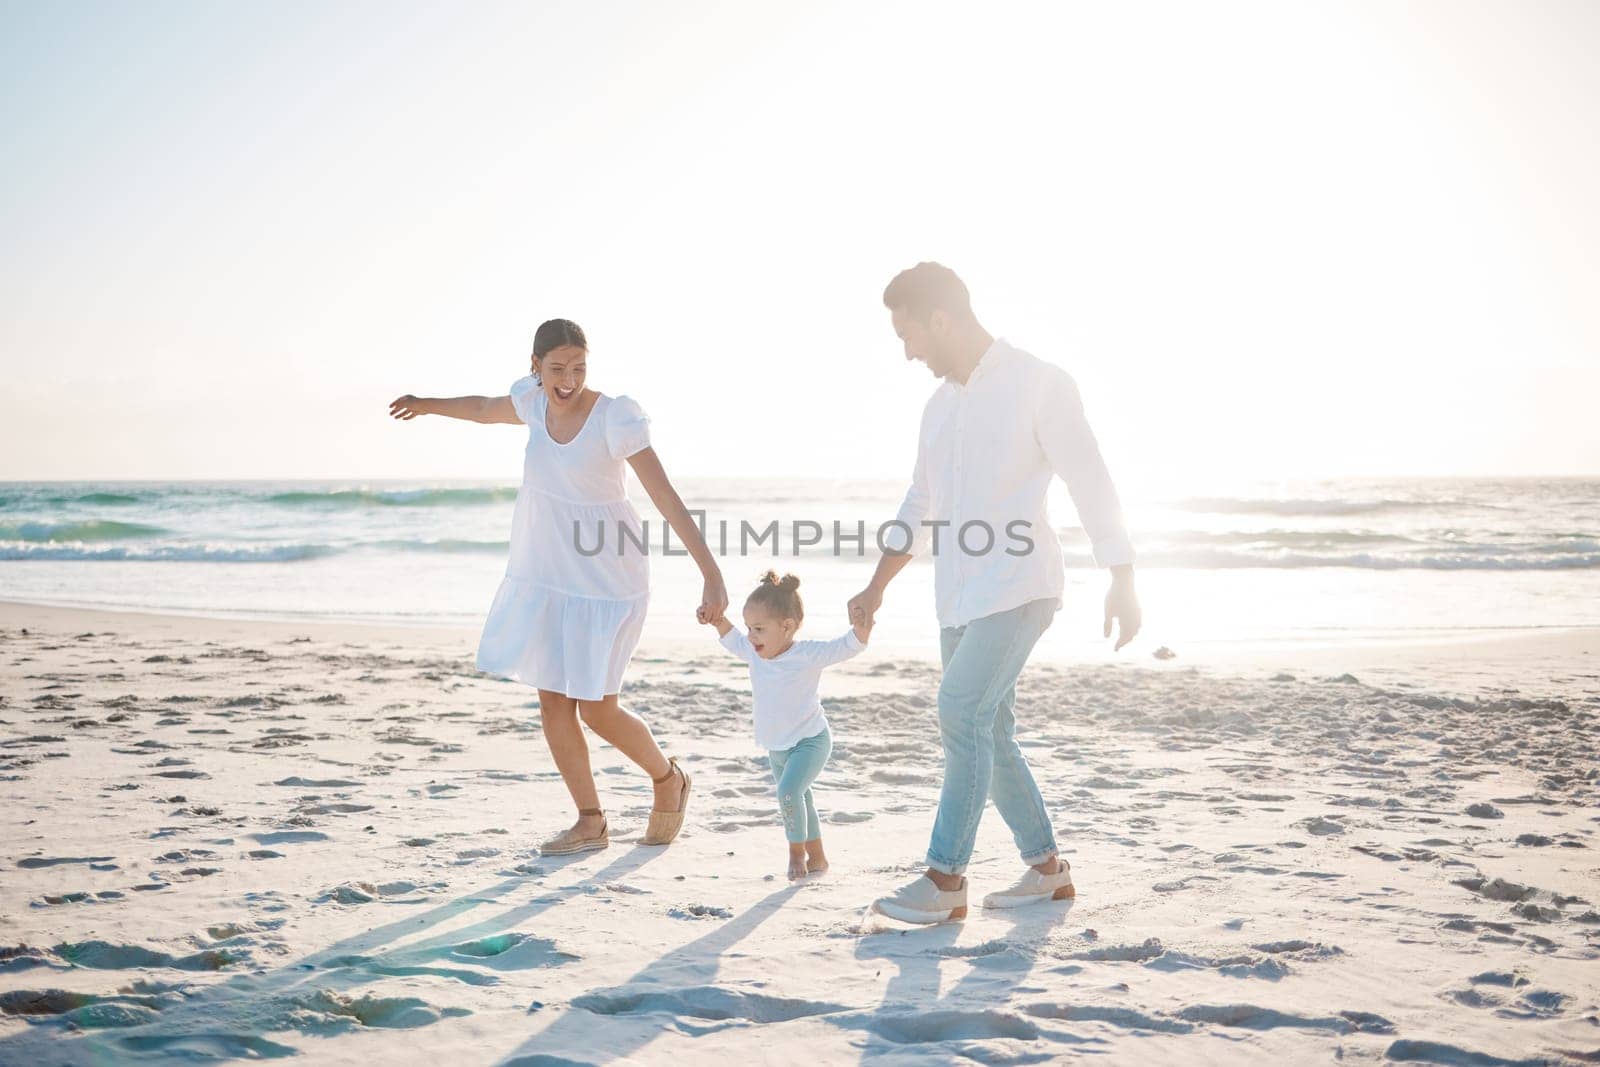 Happy family, holding hands and playing on beach with mockup space for holiday weekend or vacation. Mother, father and child enjoying play time together on ocean coast for fun bonding in nature.